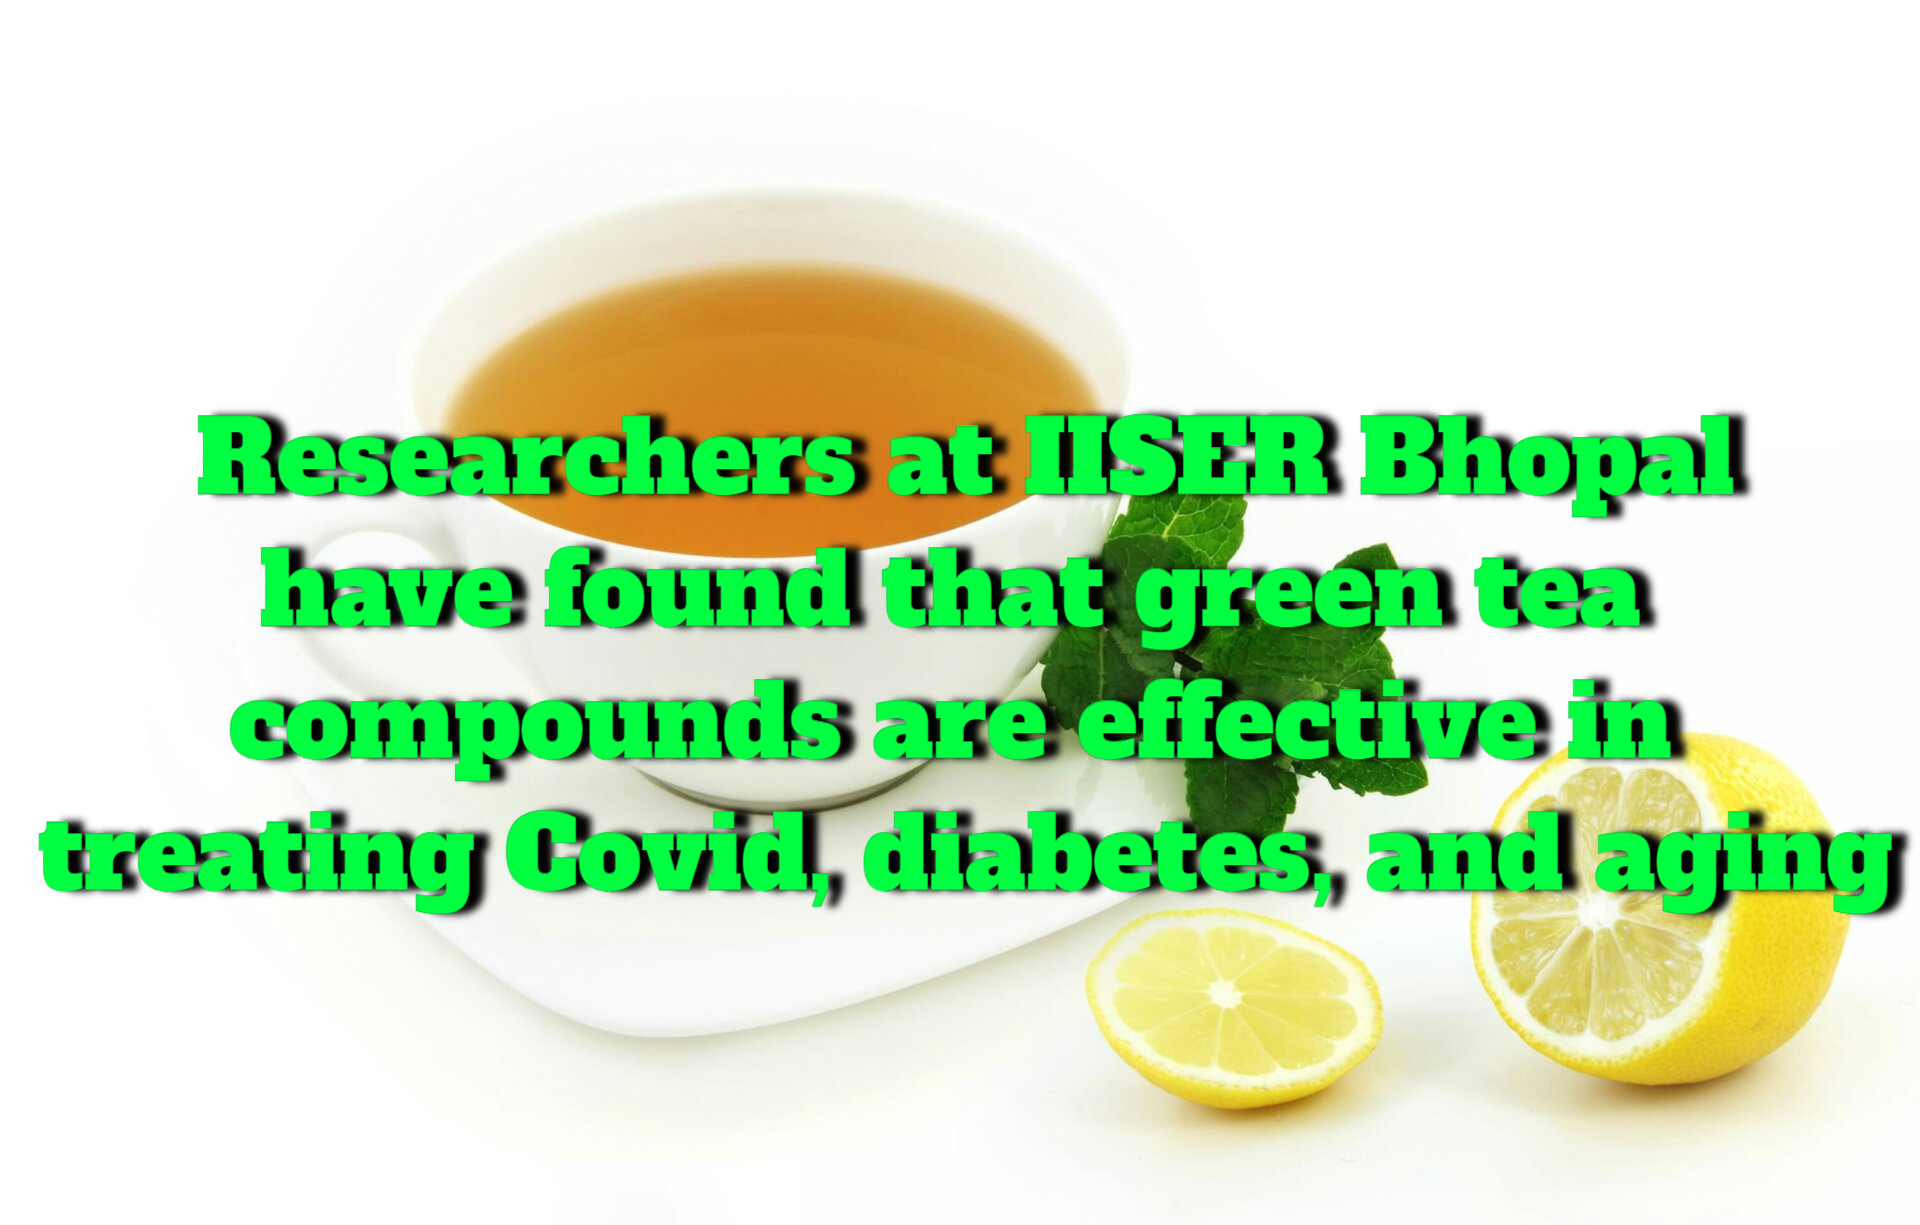 Researchers at IISER Bhopal have found green tea compounds to be effective in treating Covid, diabetes, and ageing